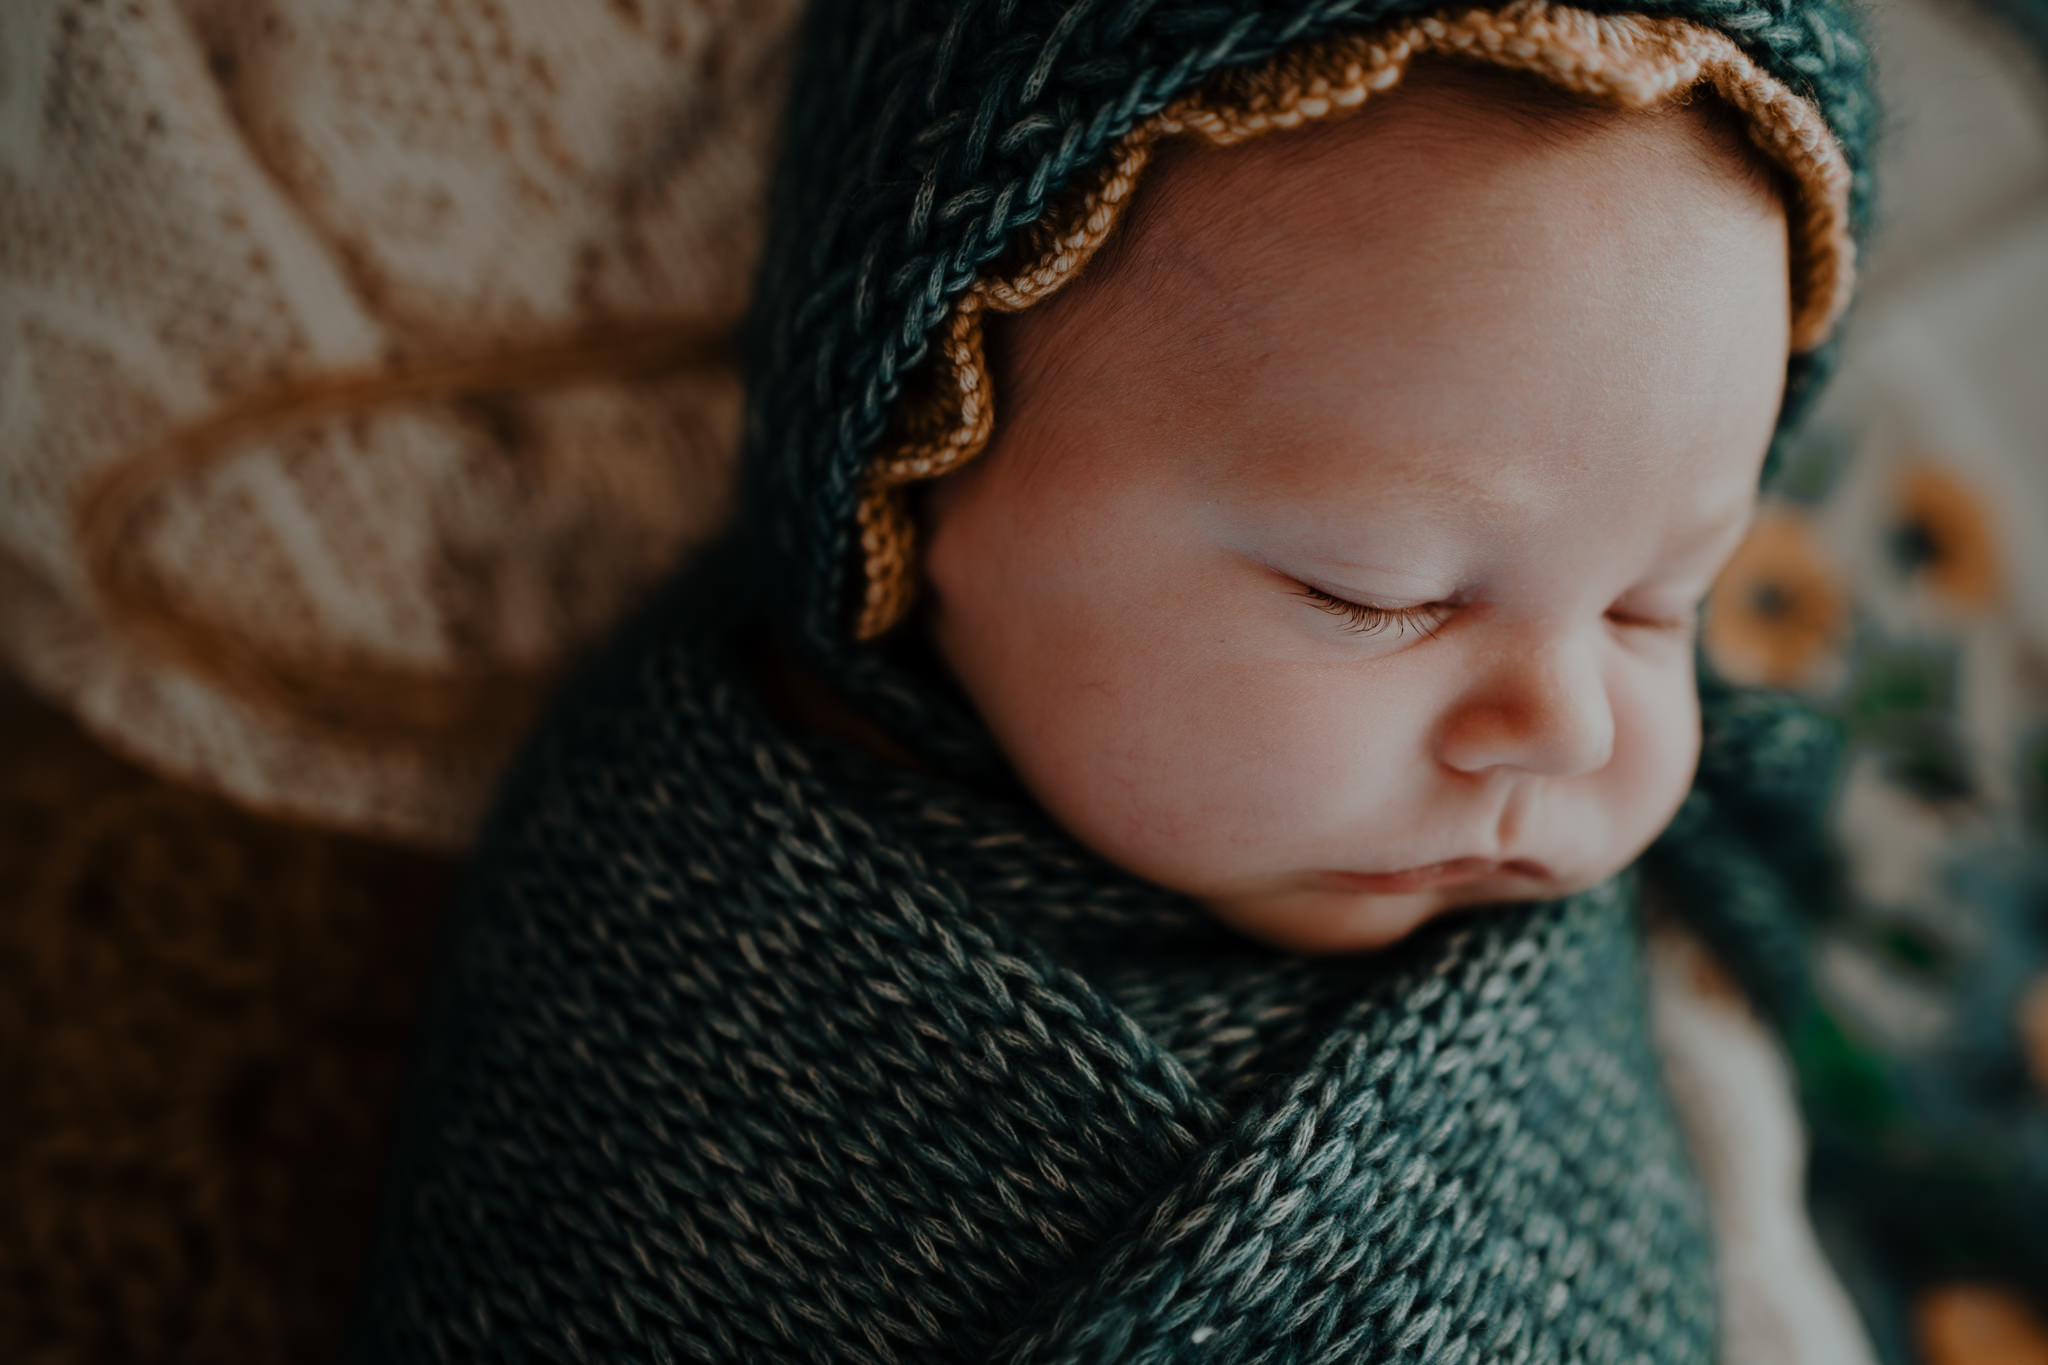 teal and mustard knit wrap and bonnets styled in home artistic baby photographer Belfast